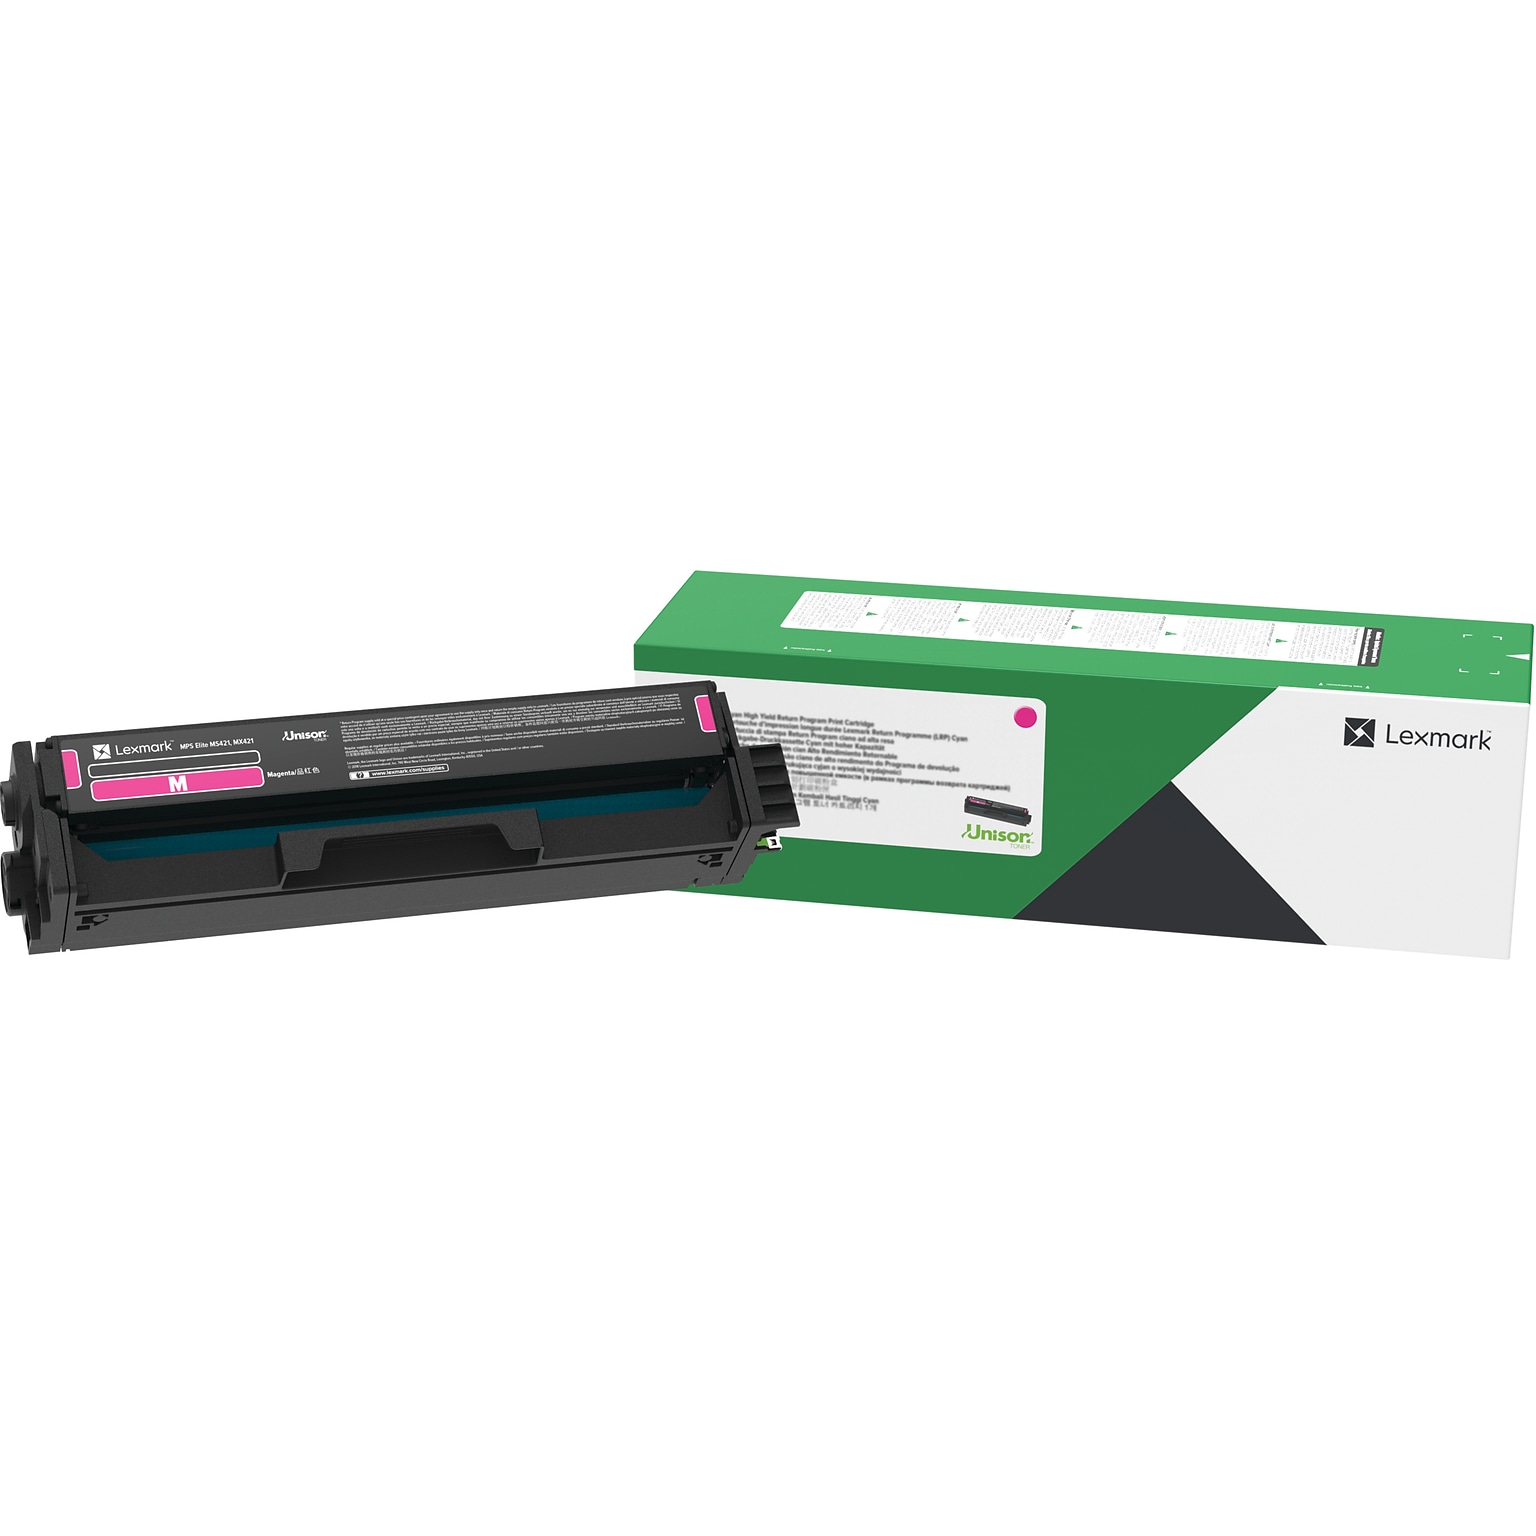 Lexmark C341XM0 Magenta Extra High Yield Toner Cartridge, Prints Up to 4,500 Pages